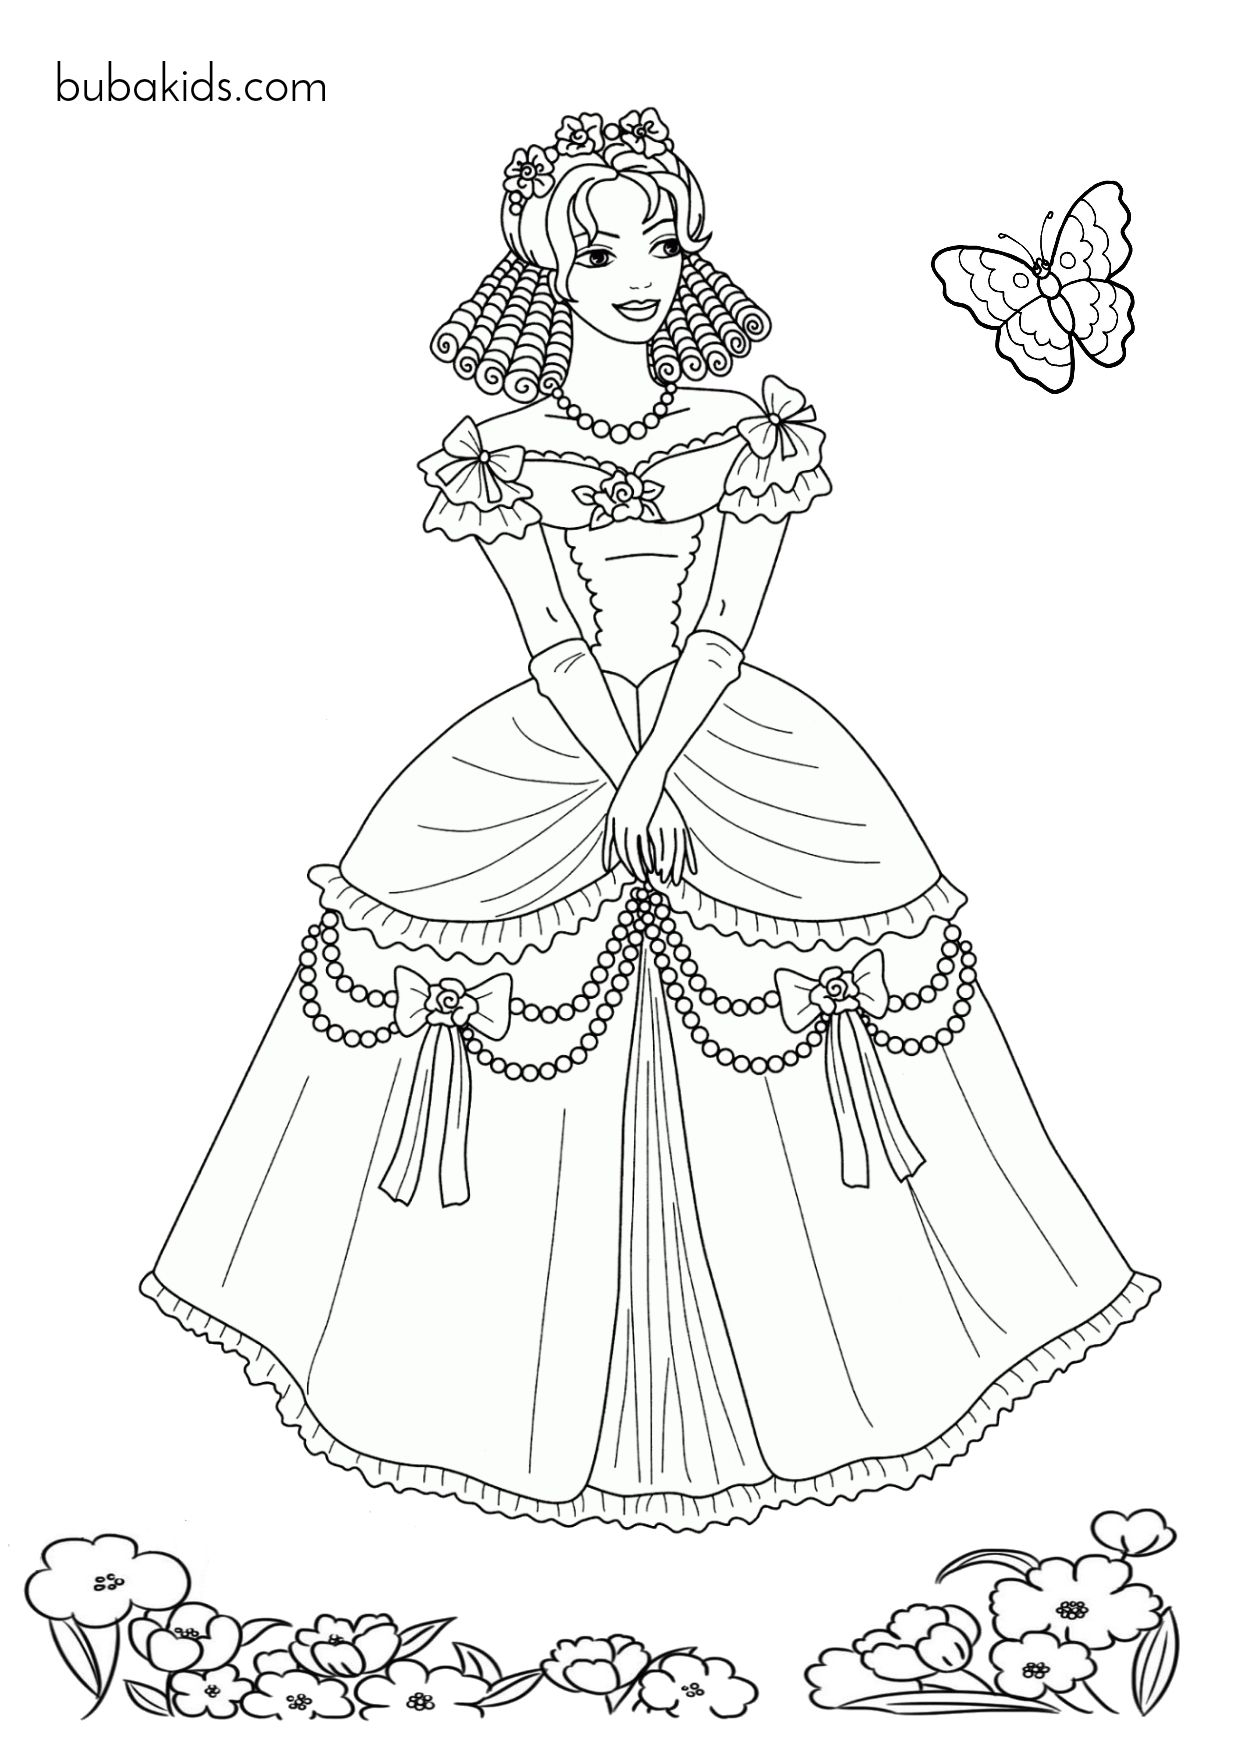 beautiful princess with adorable curly hair coloring page